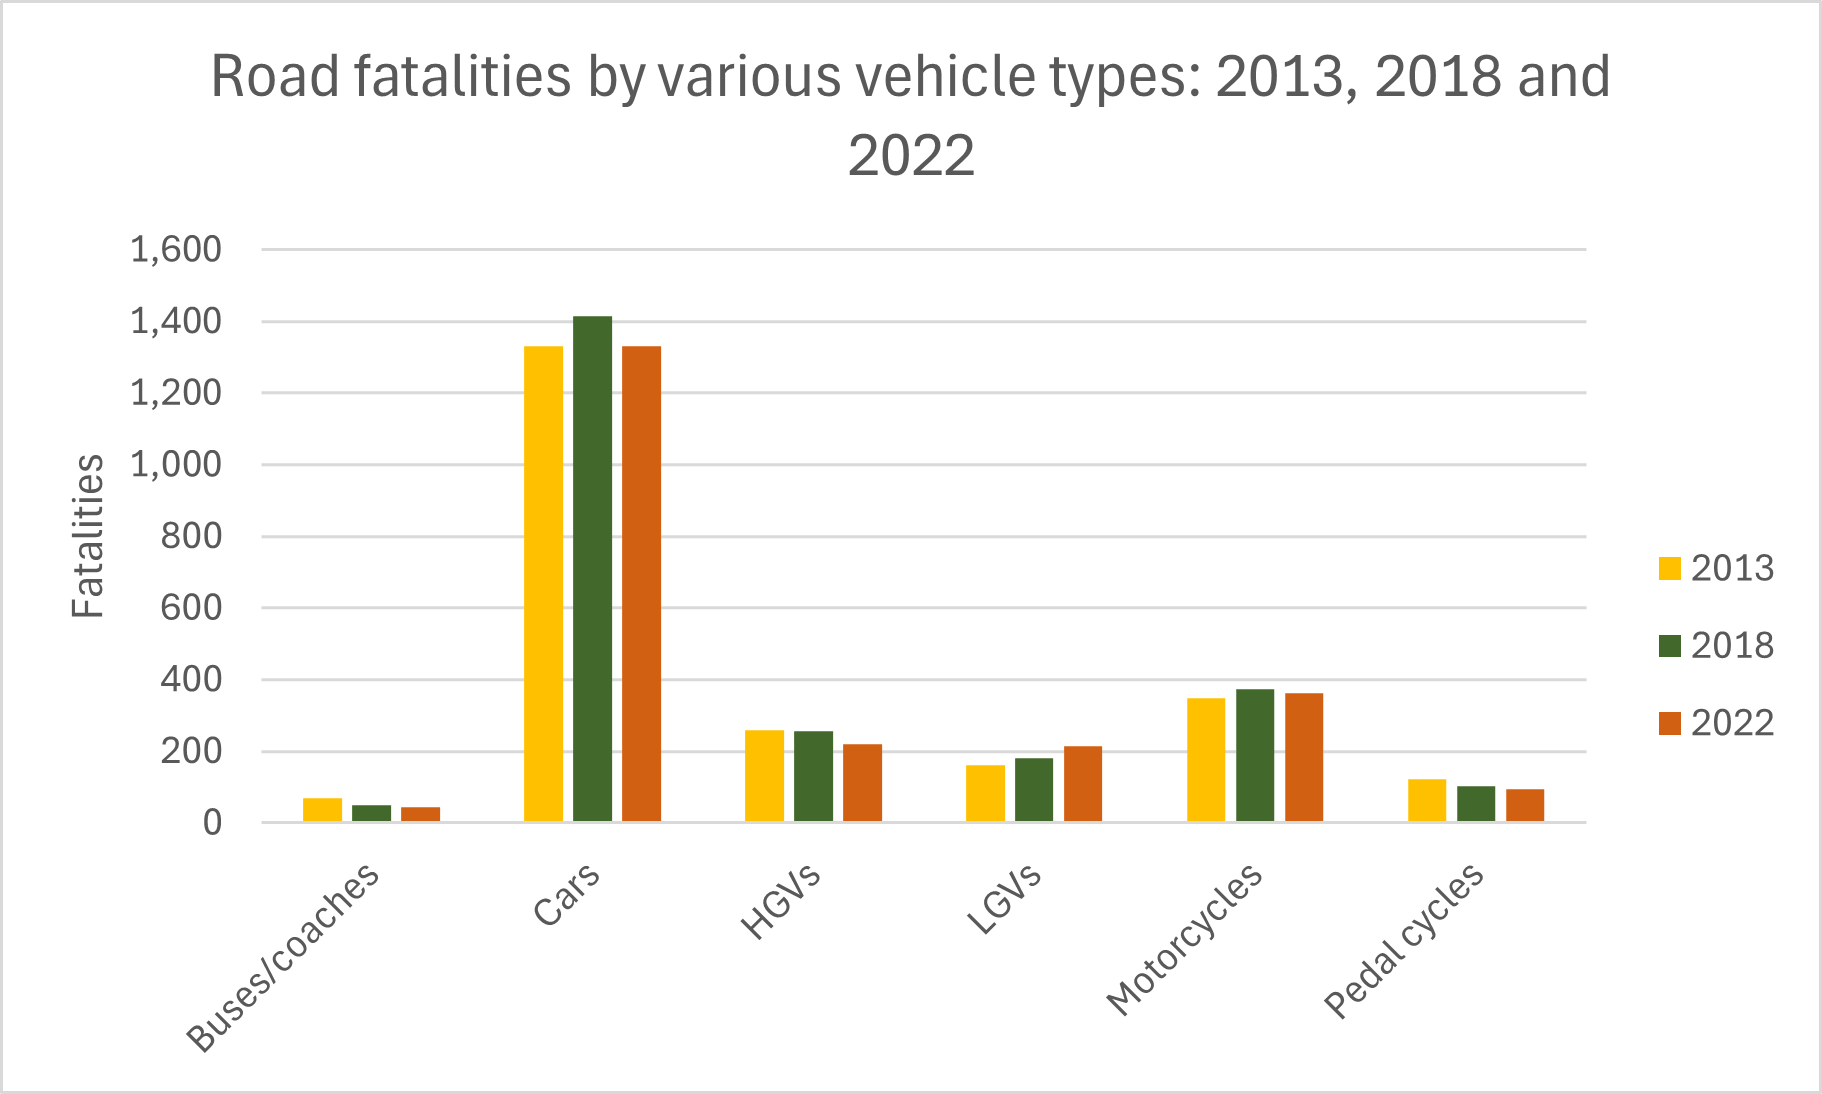 Fatalities by vehicle type